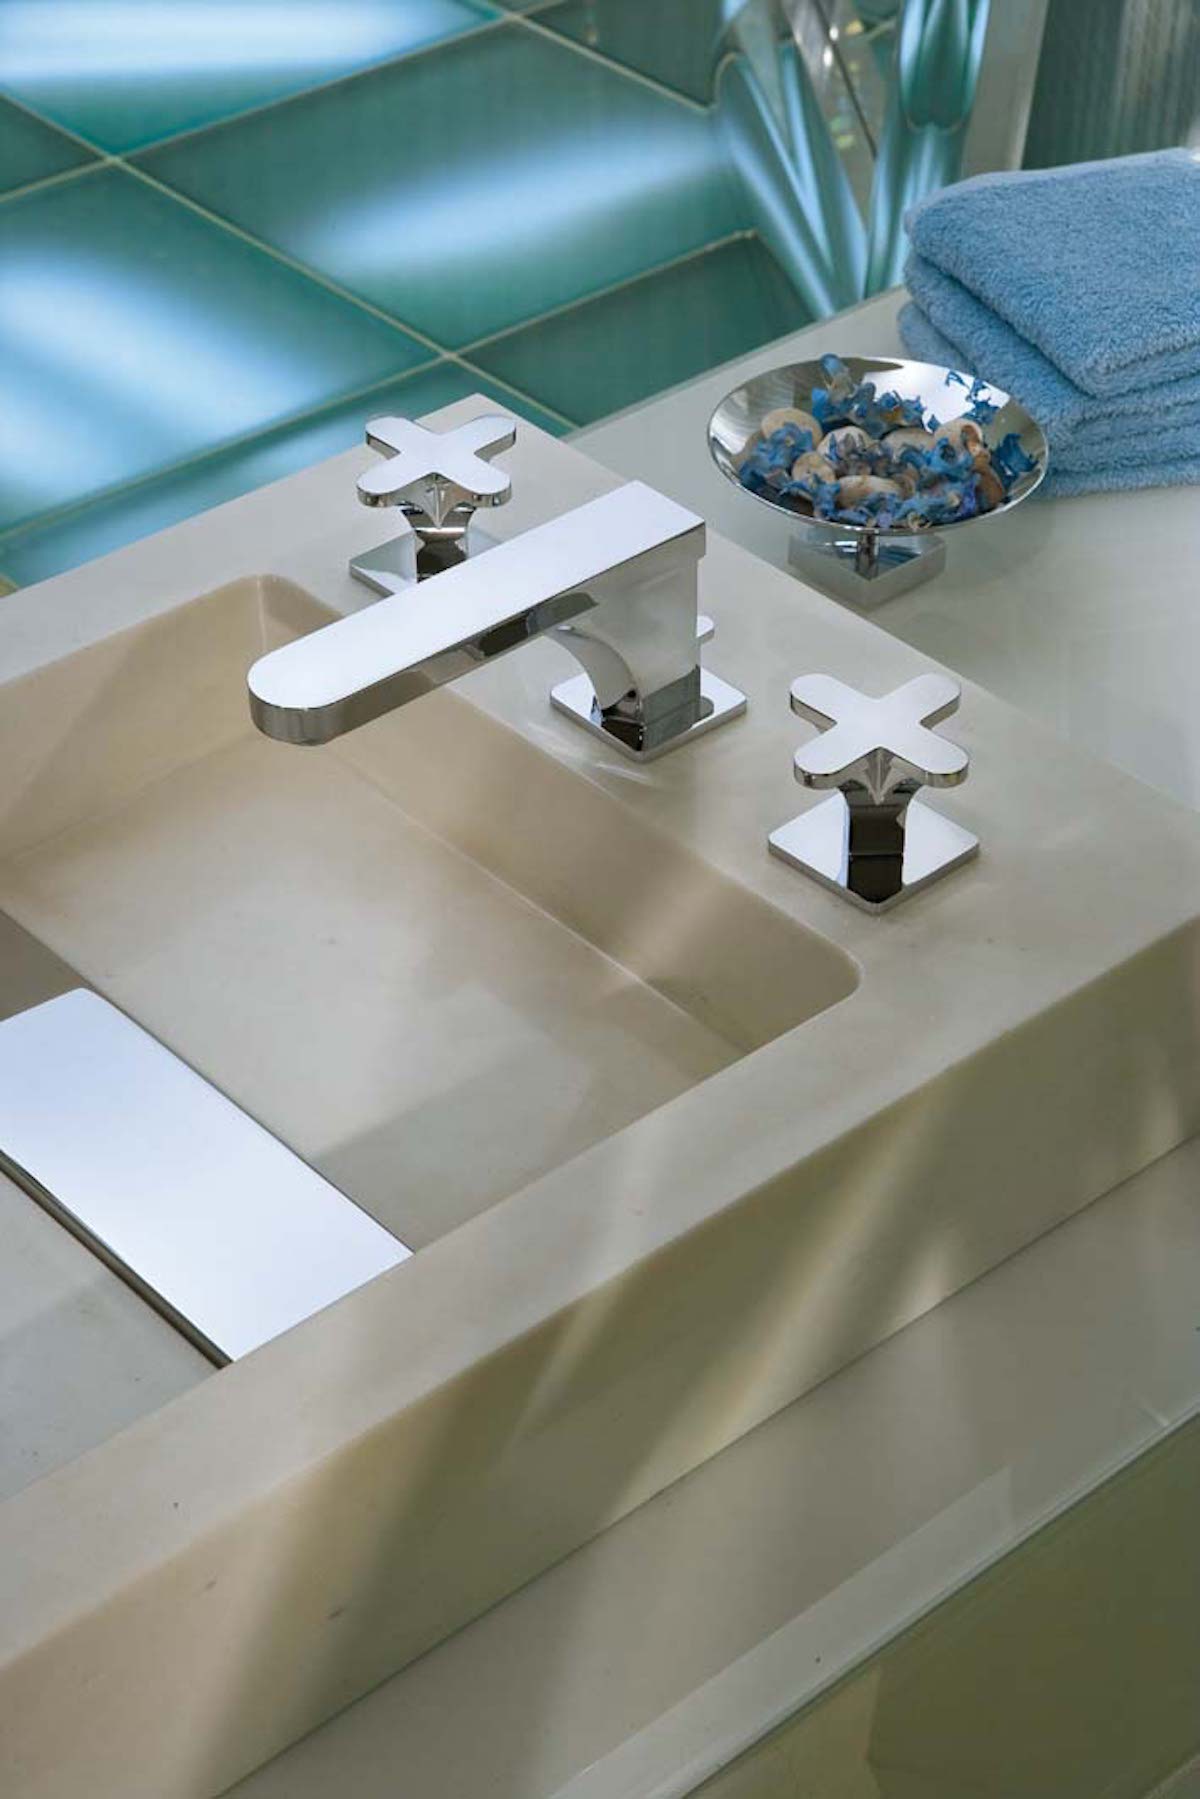 luxury designer faucet, sink and smedbo bathroom accessories at the immerse showroom